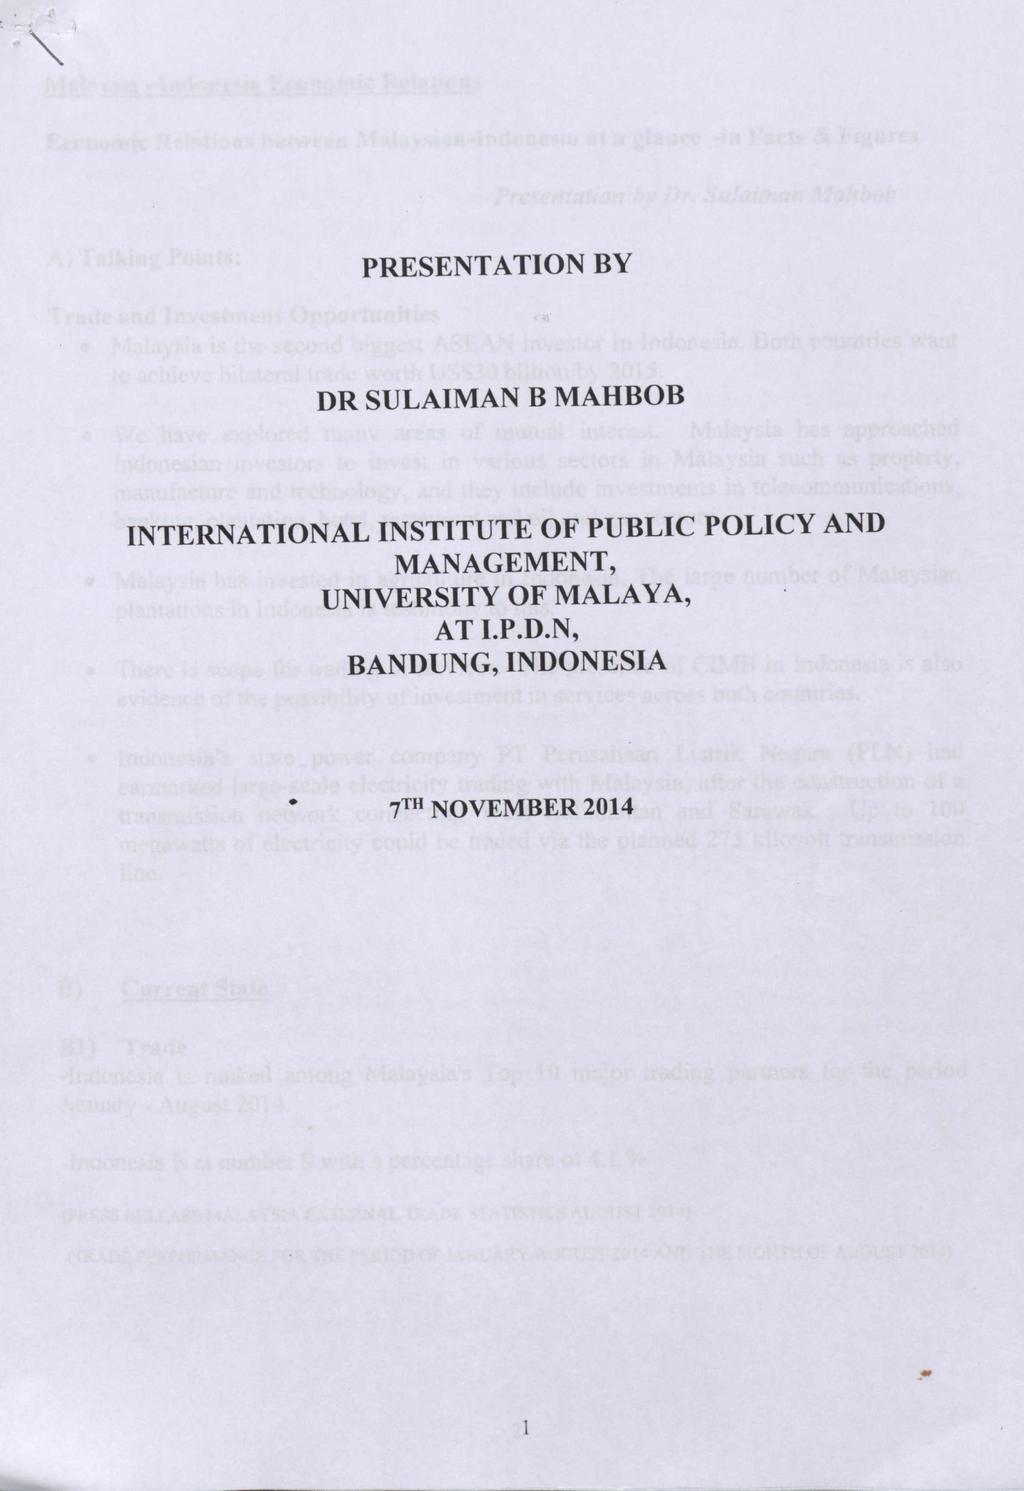 "I PRESENTATION BY DR SULAIMAN B MAHBOB INTERNATIONAL INSTITUTE OF PUBLIC POLICY AND